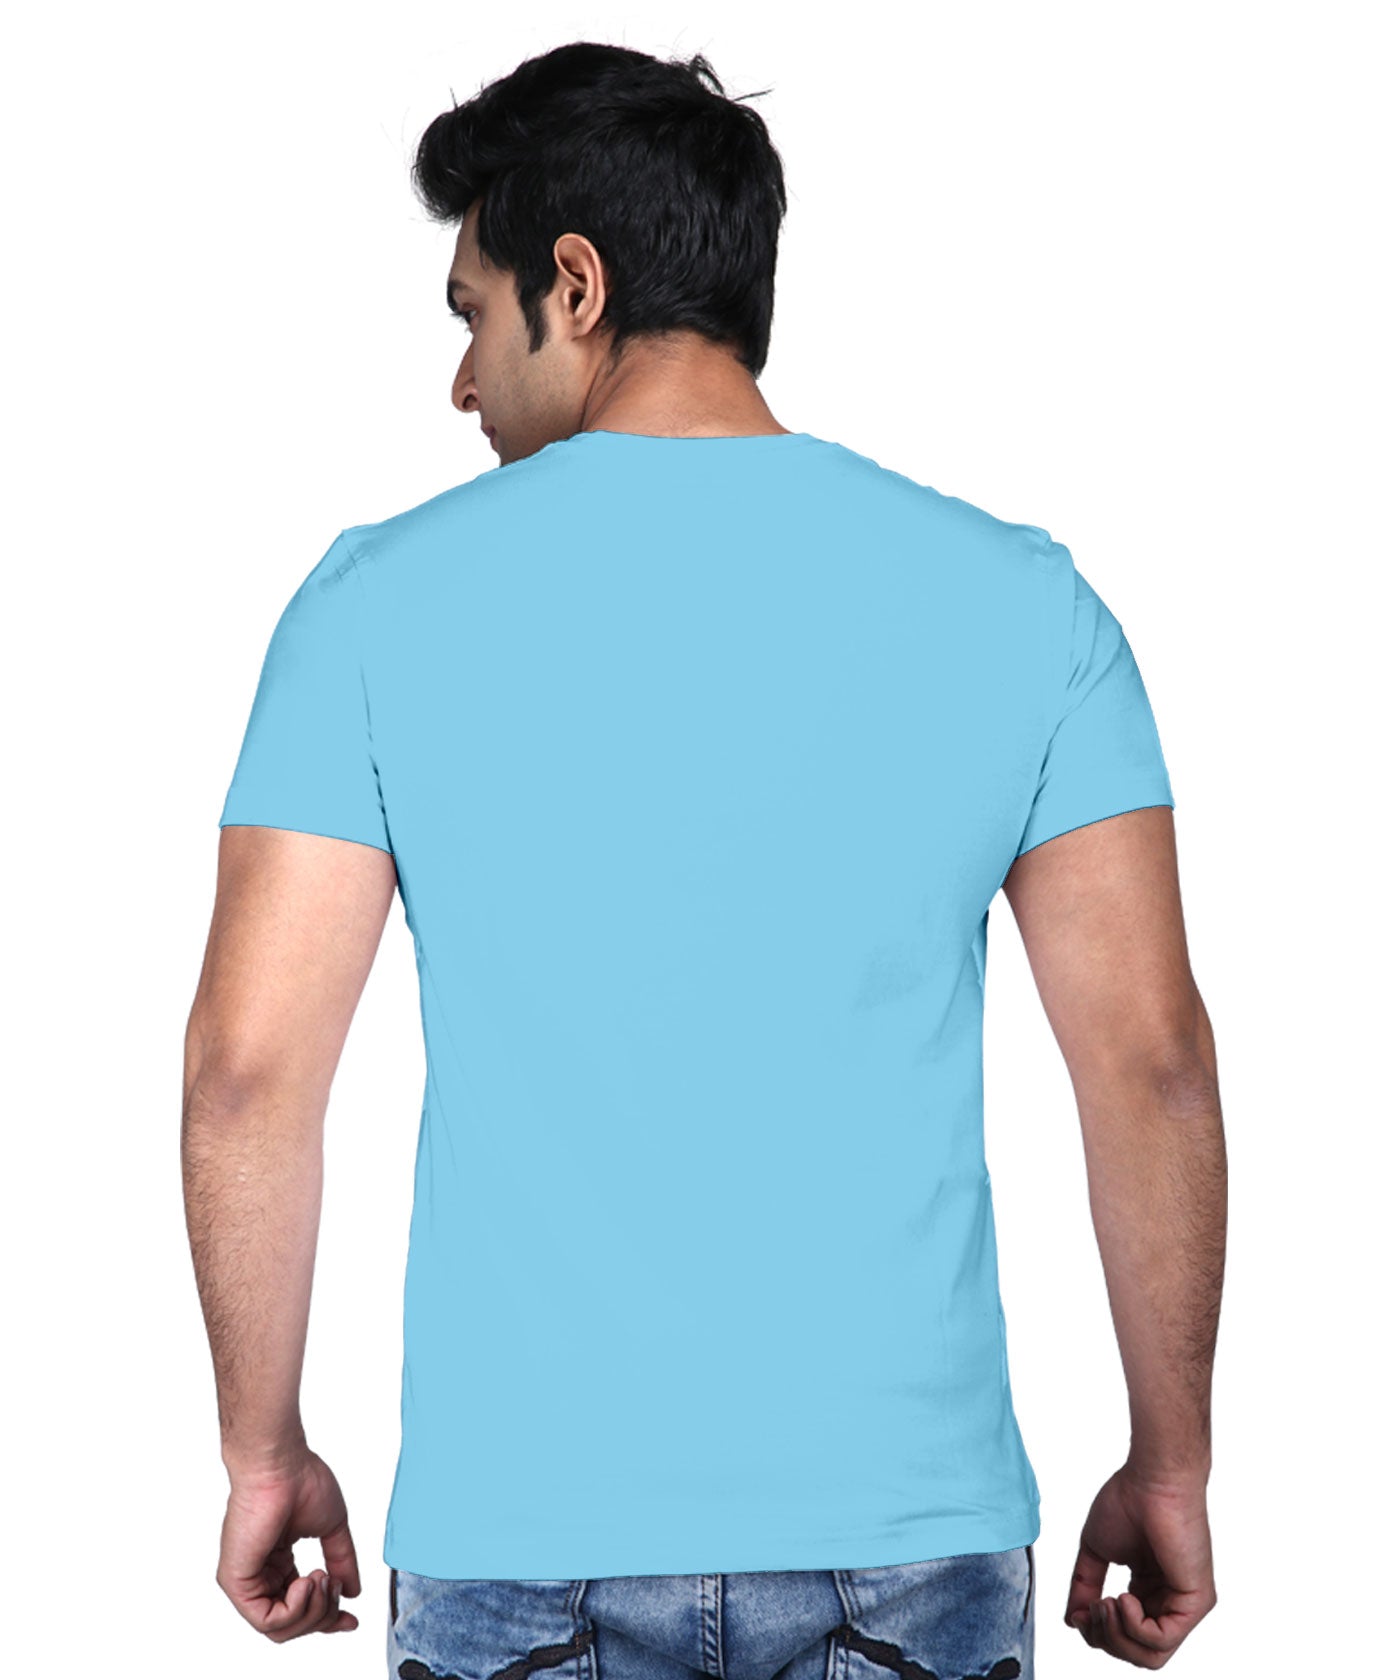 Just Ride - Premium Round Neck Cotton Tees for Men - Sky Blue And White Melange